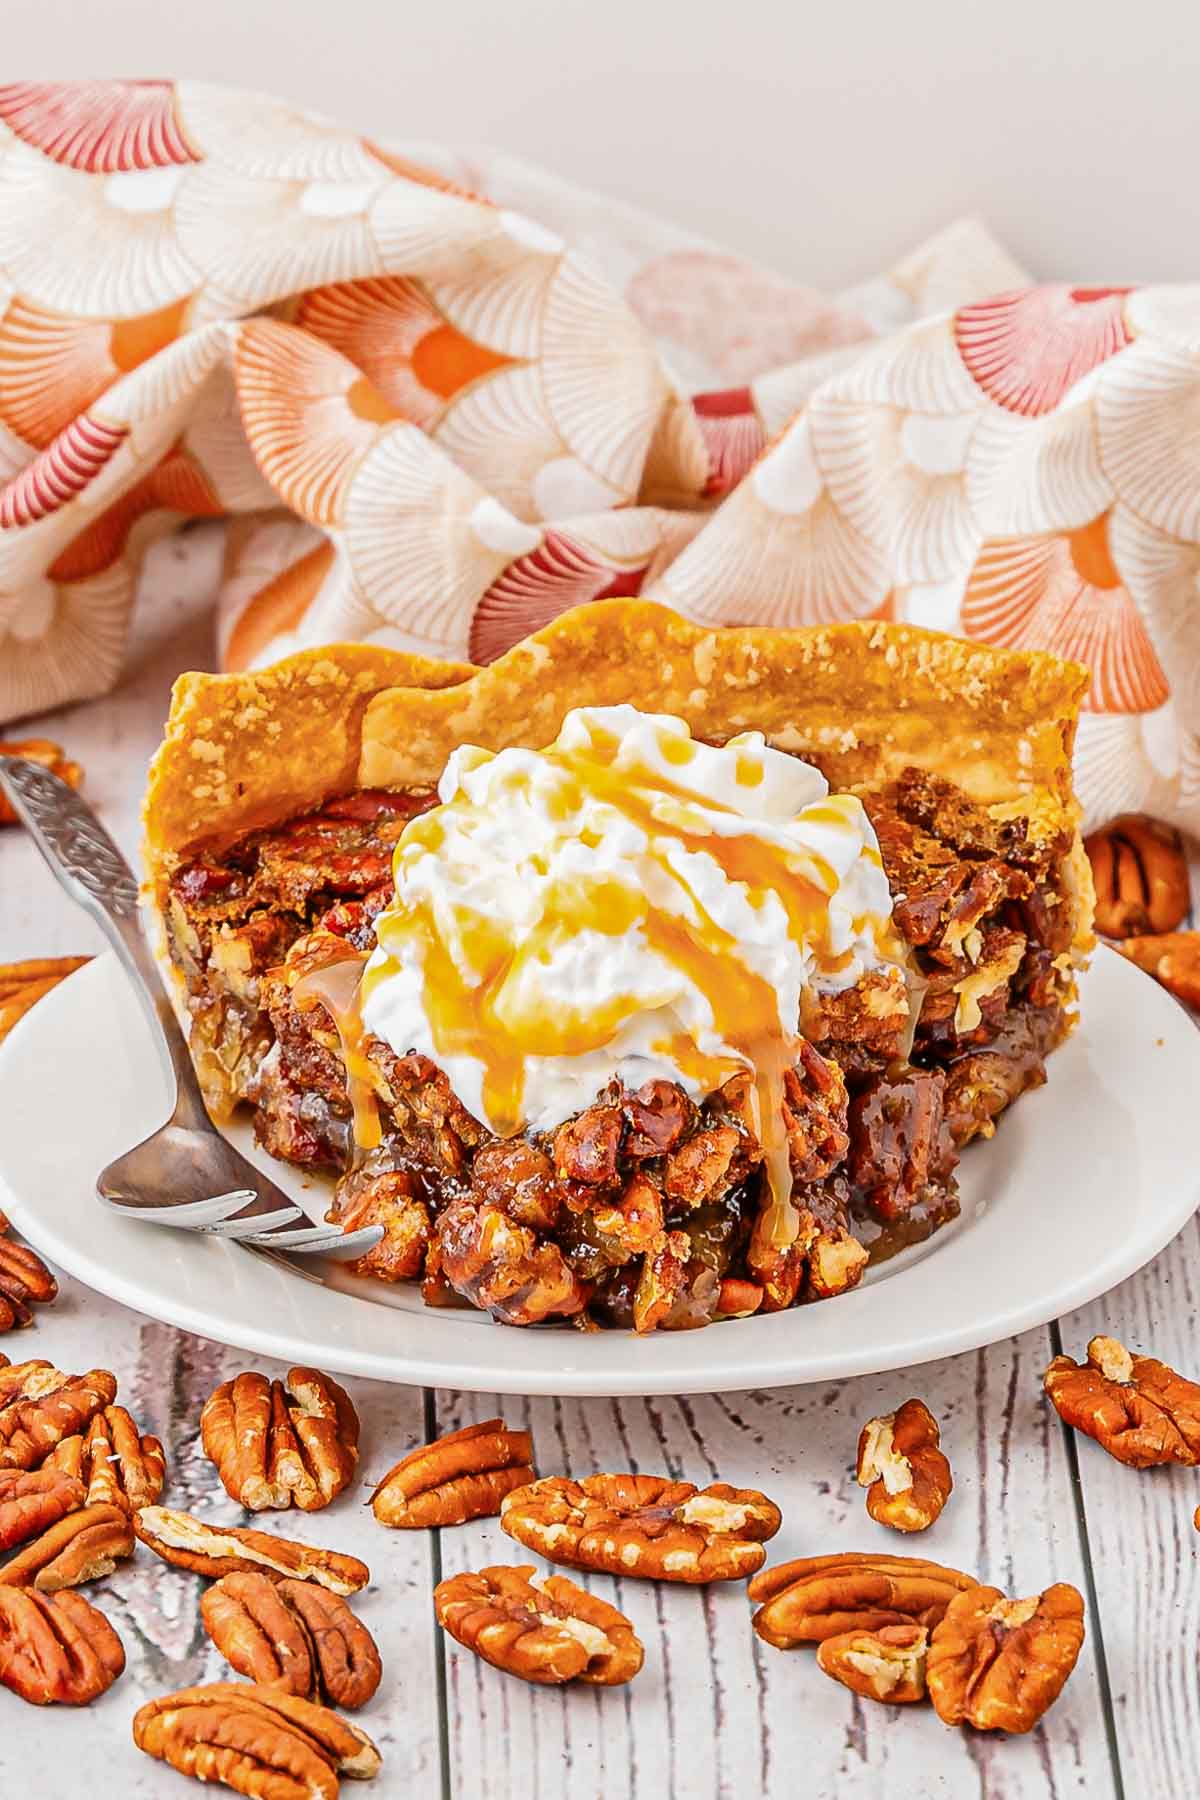 A slice of pecan pie topped with whipped cream and caramel drizzle with fork.